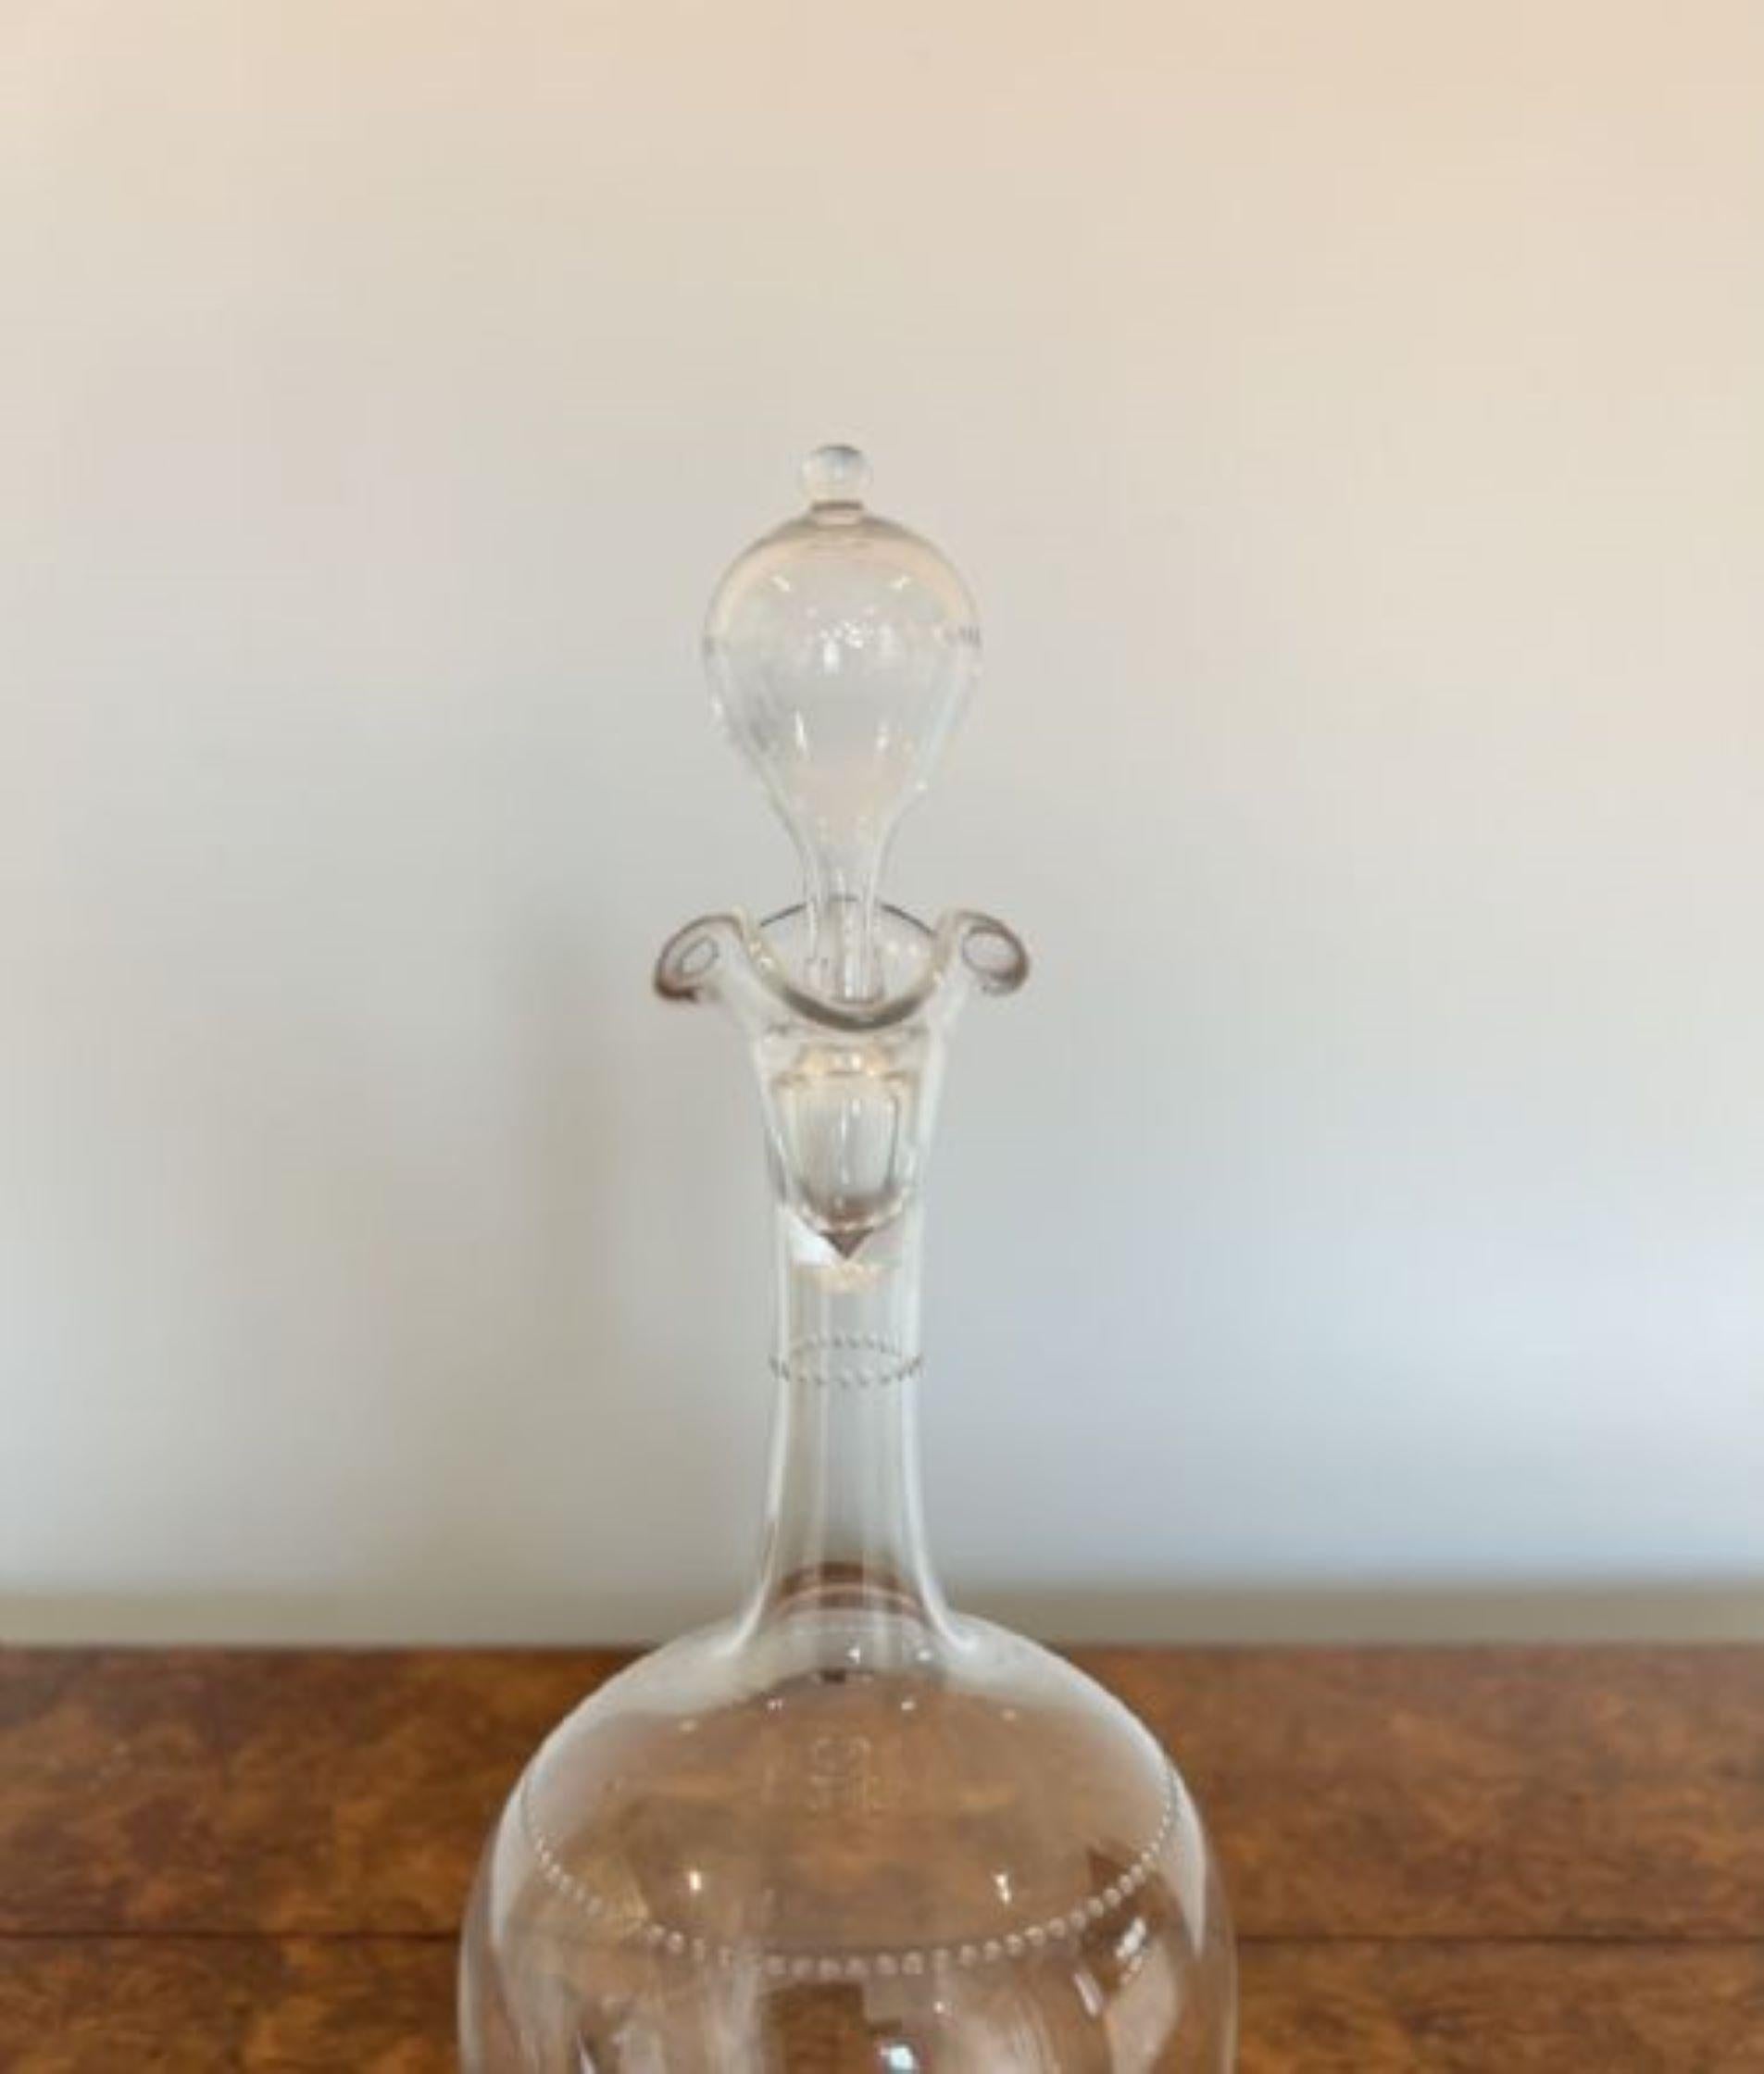 Elegant antique Victorian quality decanter having an elegant antique Victorian decanter with a lovely wavy shaped top, a rounded body standing on a circular base with the original glass stopper. 